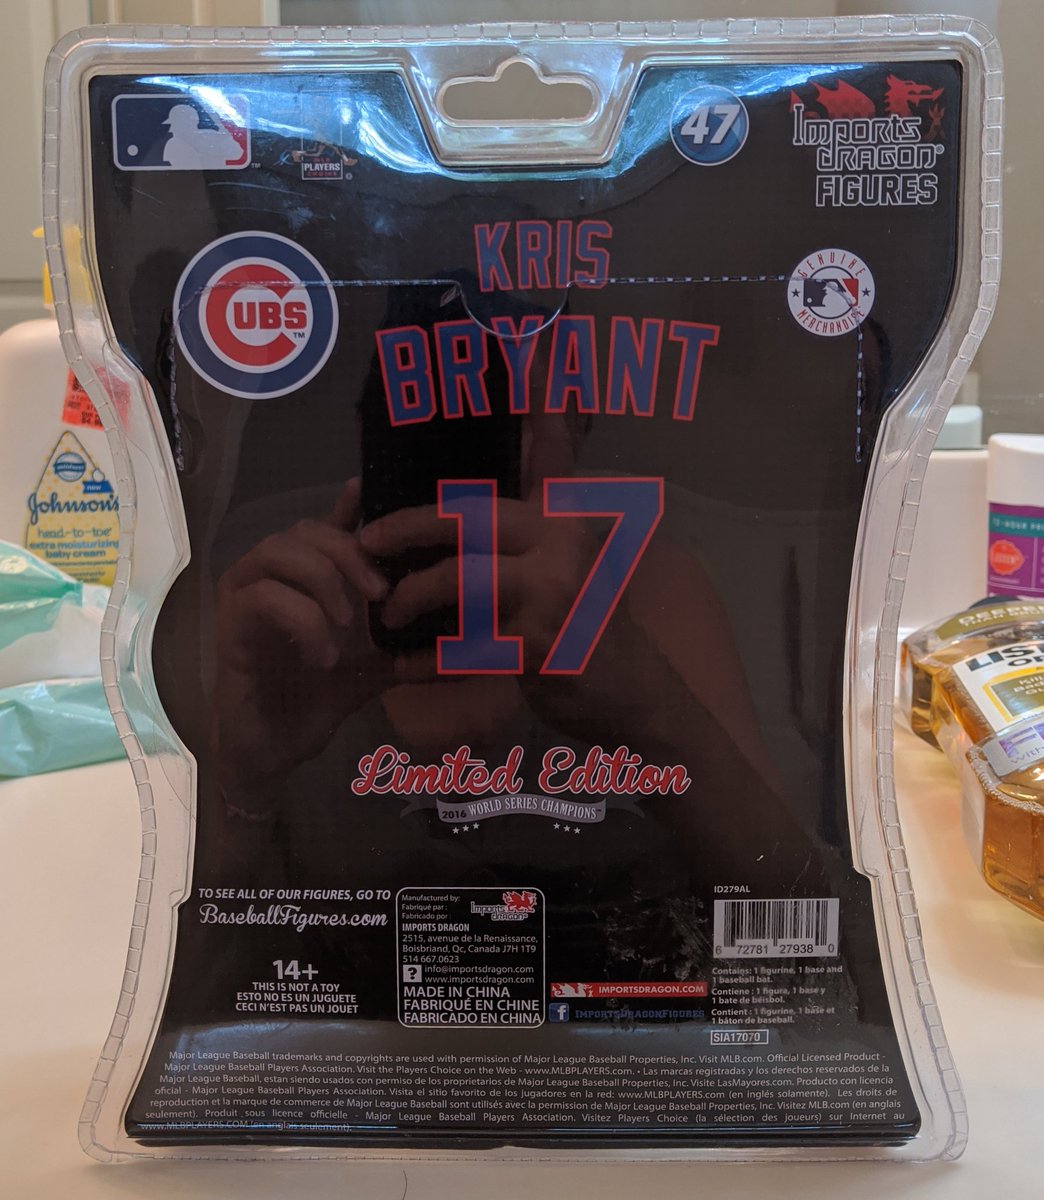 Kris Bryant limited edition figurine never been opened. World series championship seaspm. Numbered 1843/2000. Front and back pics posted below.  @WatchTheBreaks  @crawlyscubs  @Cubs  @NBCSCubs  @thekapman